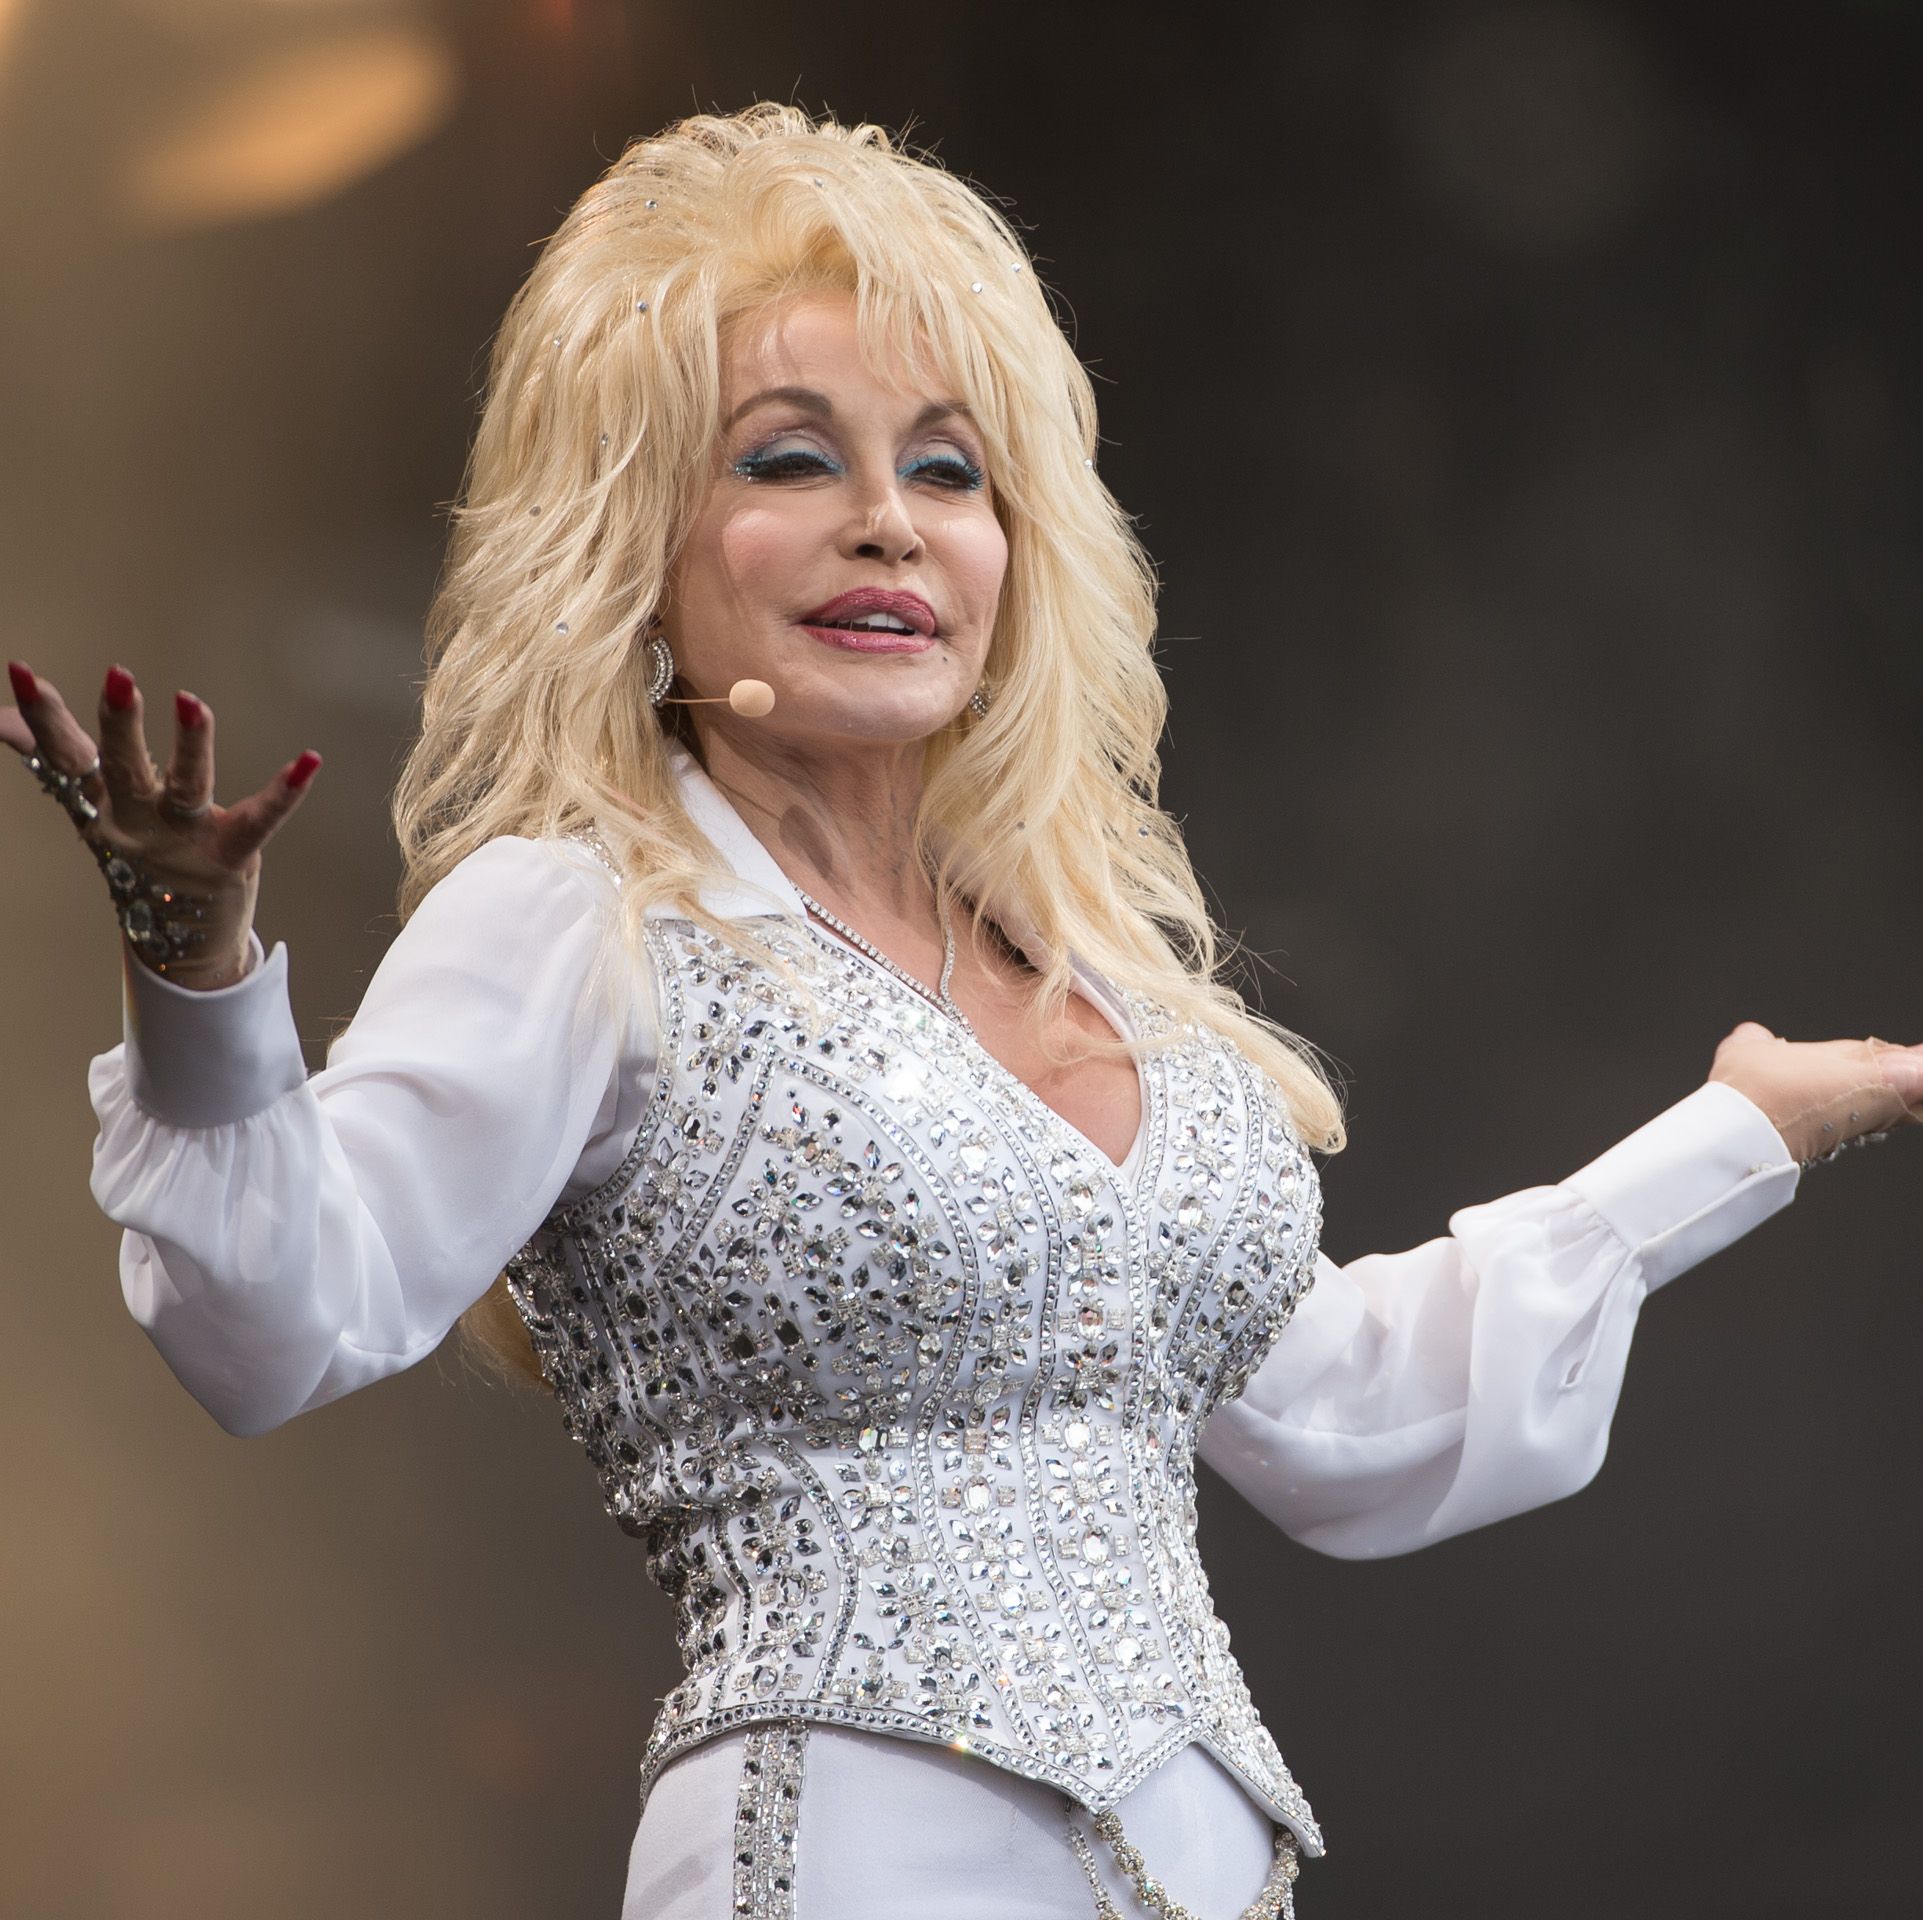 Dolly Parton Weighs in on Rumors That She Insured Her Breasts